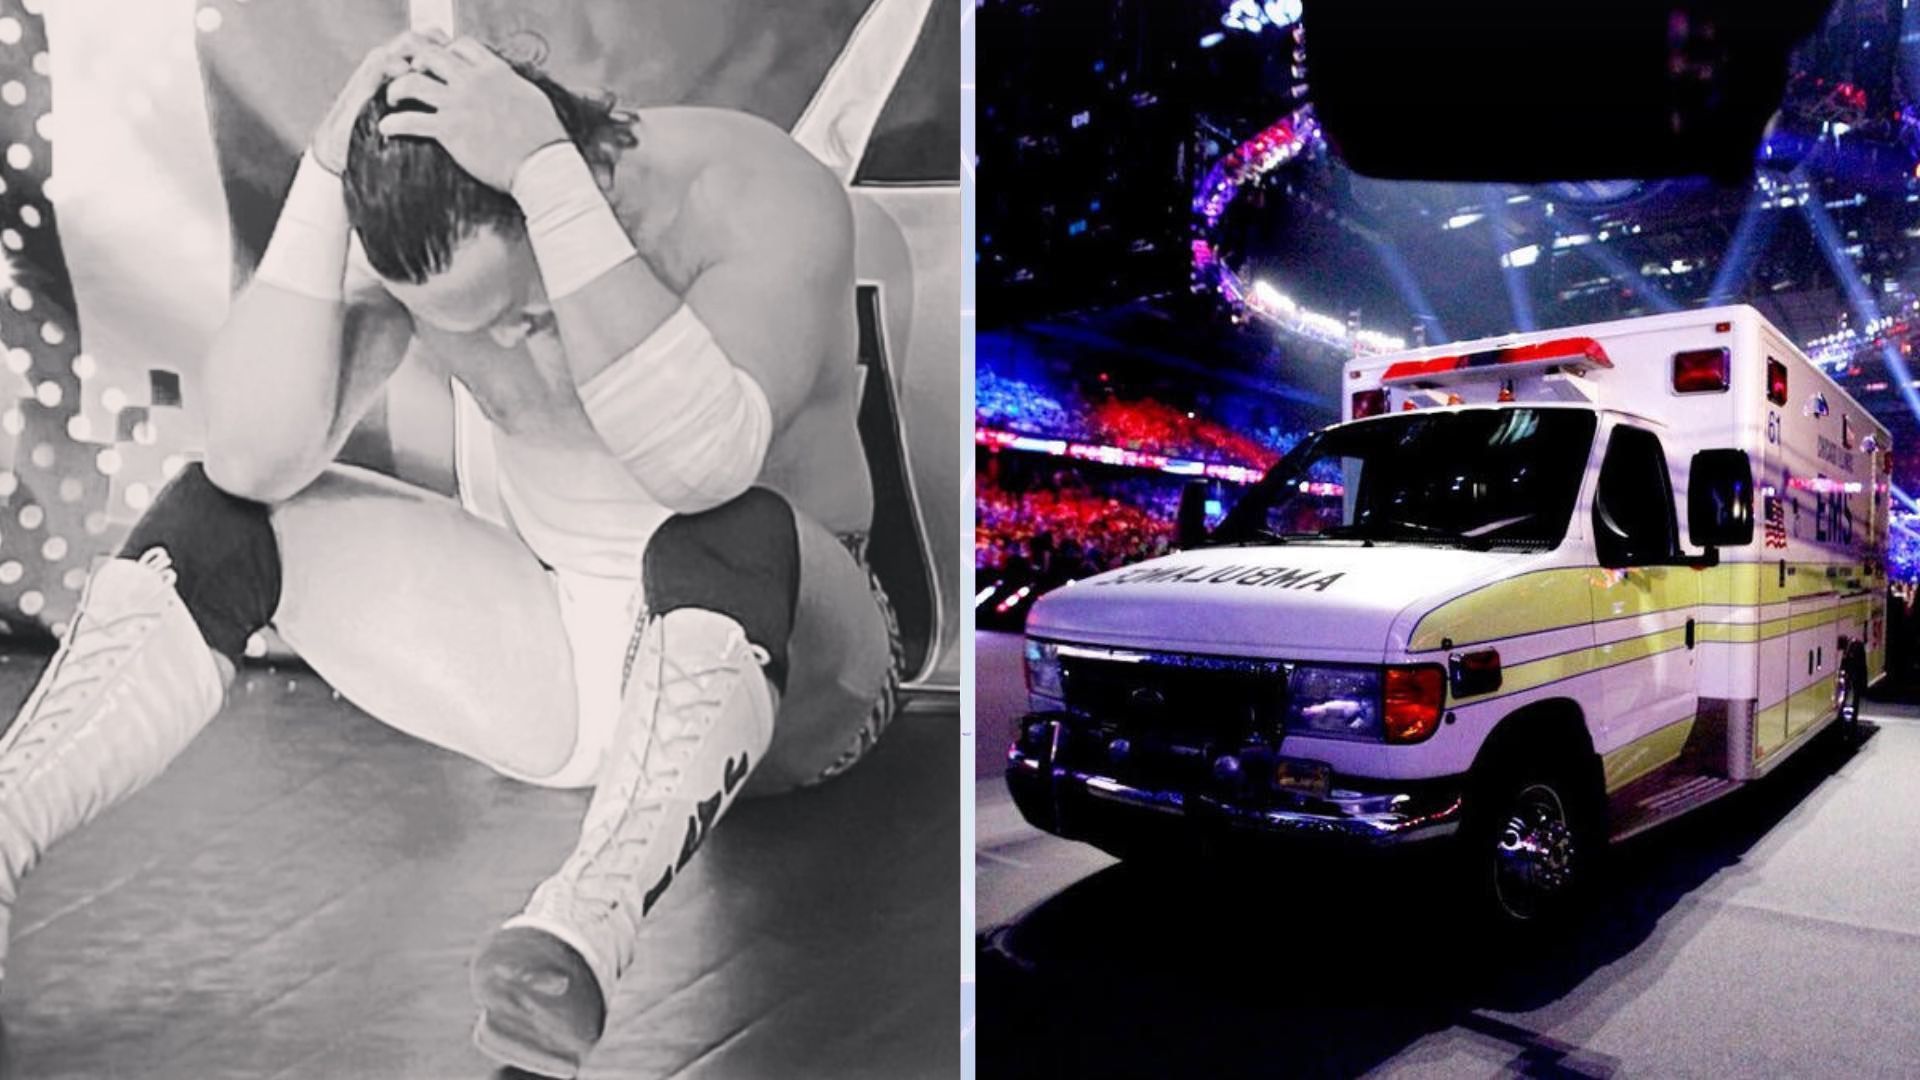 Another star joins the long list of WWE injuries [Image credits: star